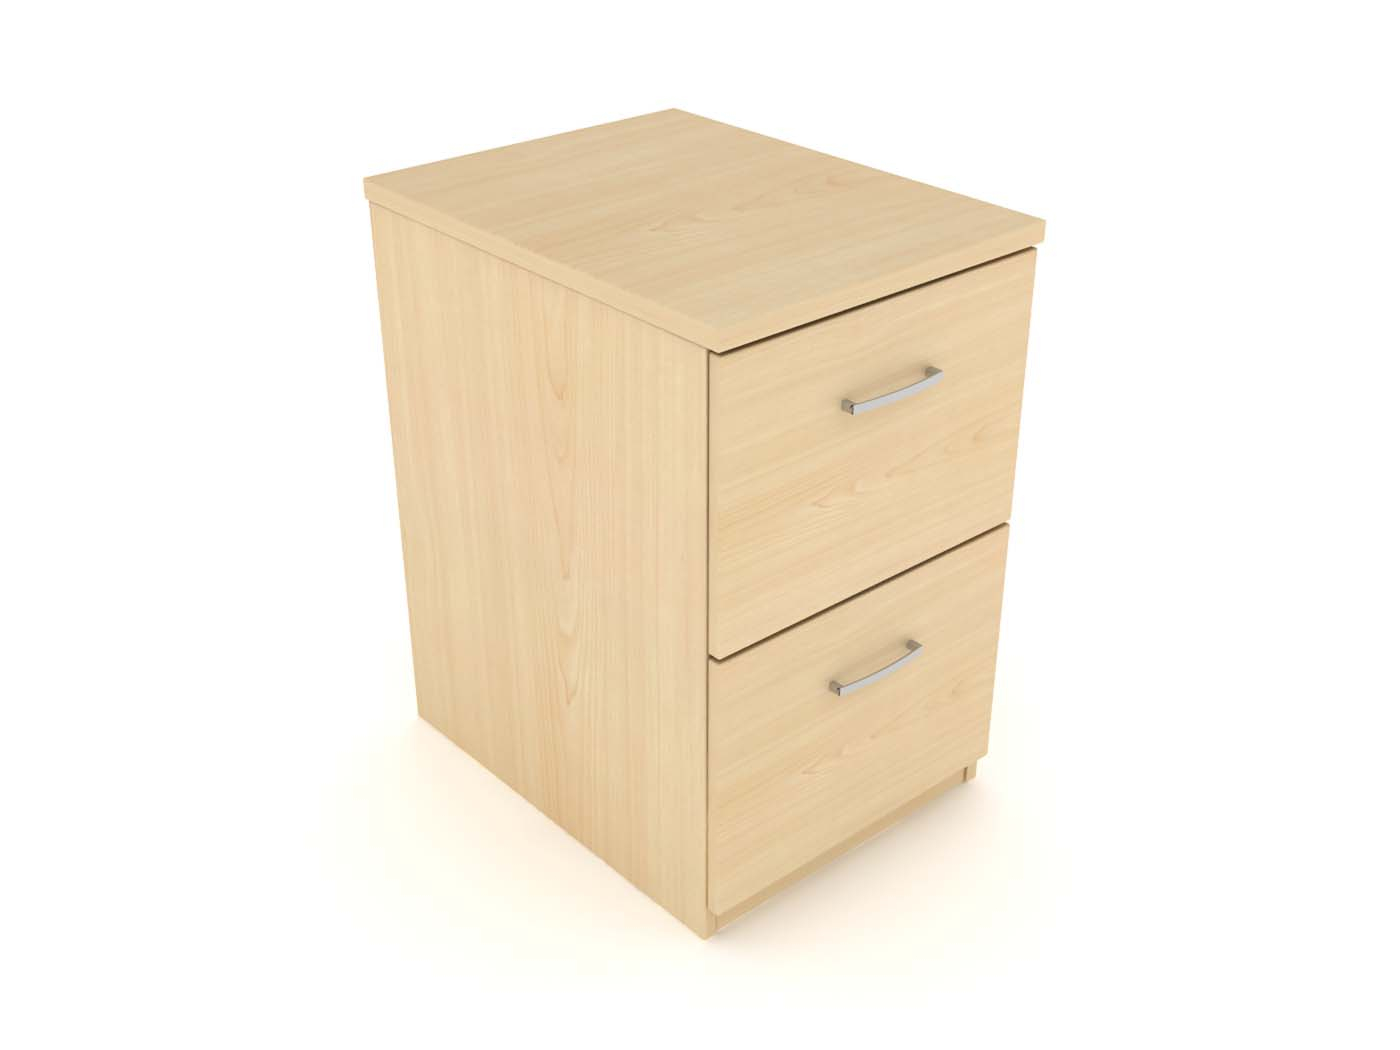 Cabinet Exciting Locking File Cabinet Walmart For Simple Storage intended for proportions 1400 X 1050